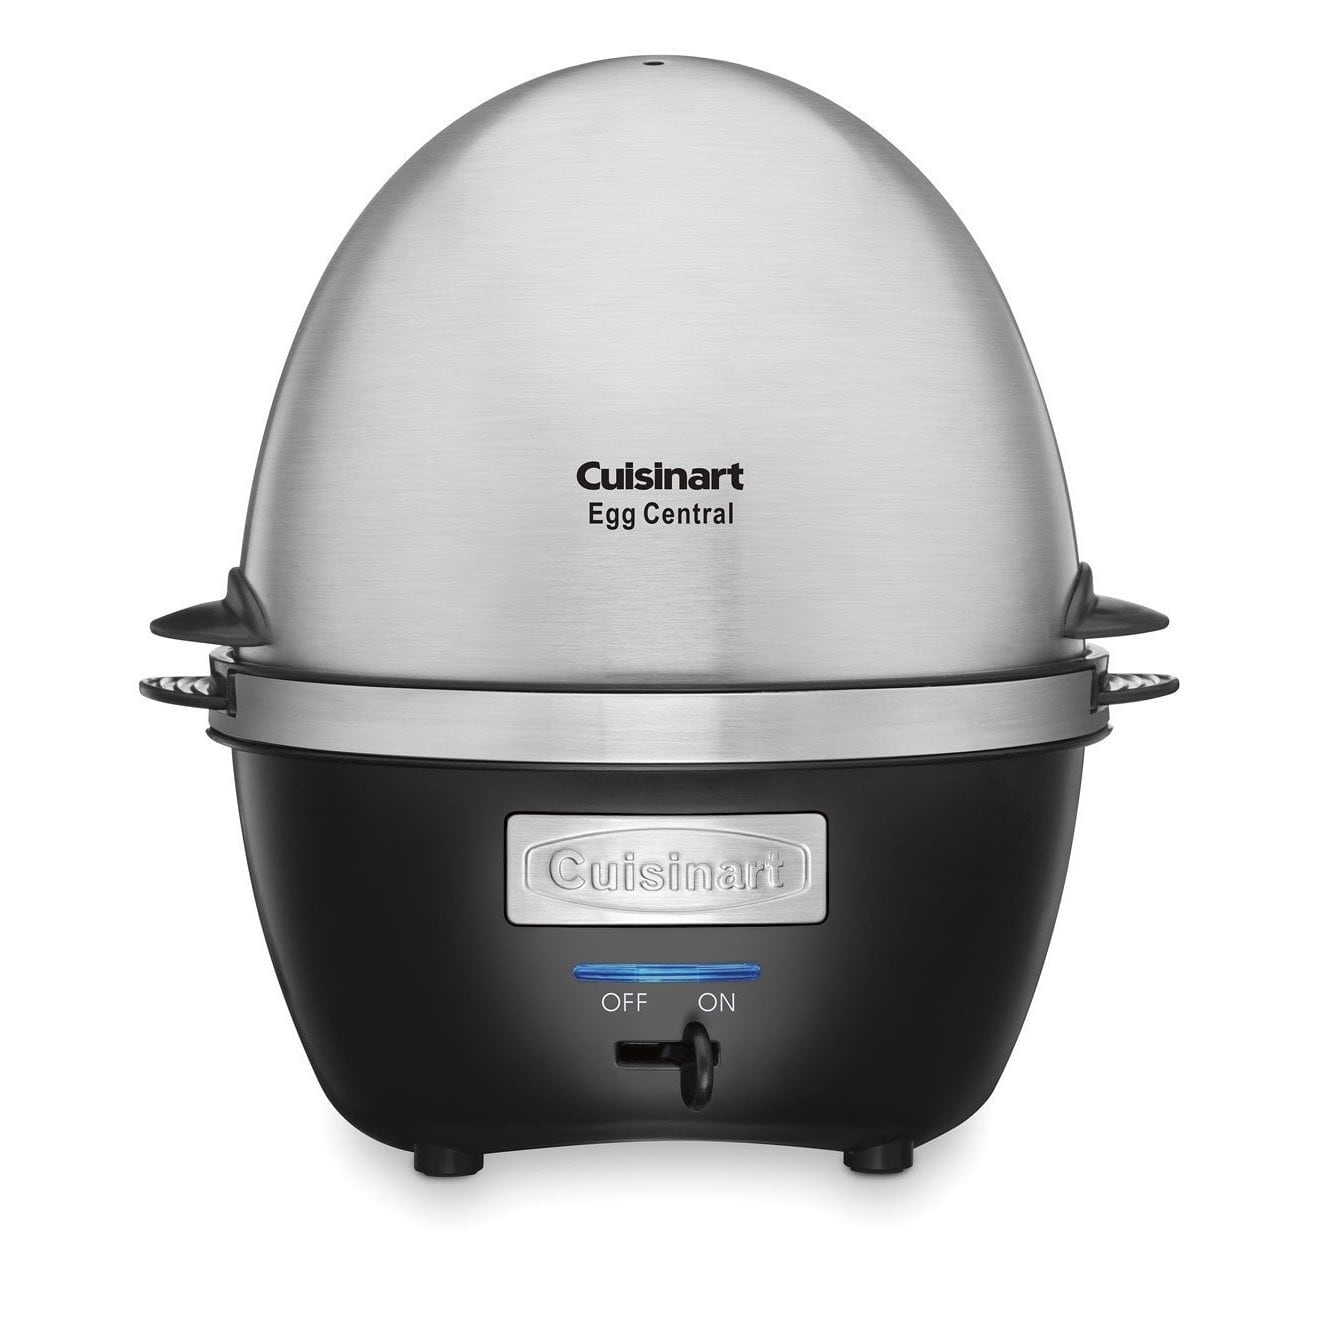 https://ak1.ostkcdn.com/images/products/is/images/direct/81032f13a5fce565965d574521180337c269328d/Cuisinart-CEC-10-Egg-Central-Egg-Cooker%2C-Stainless-%26-Black.jpg